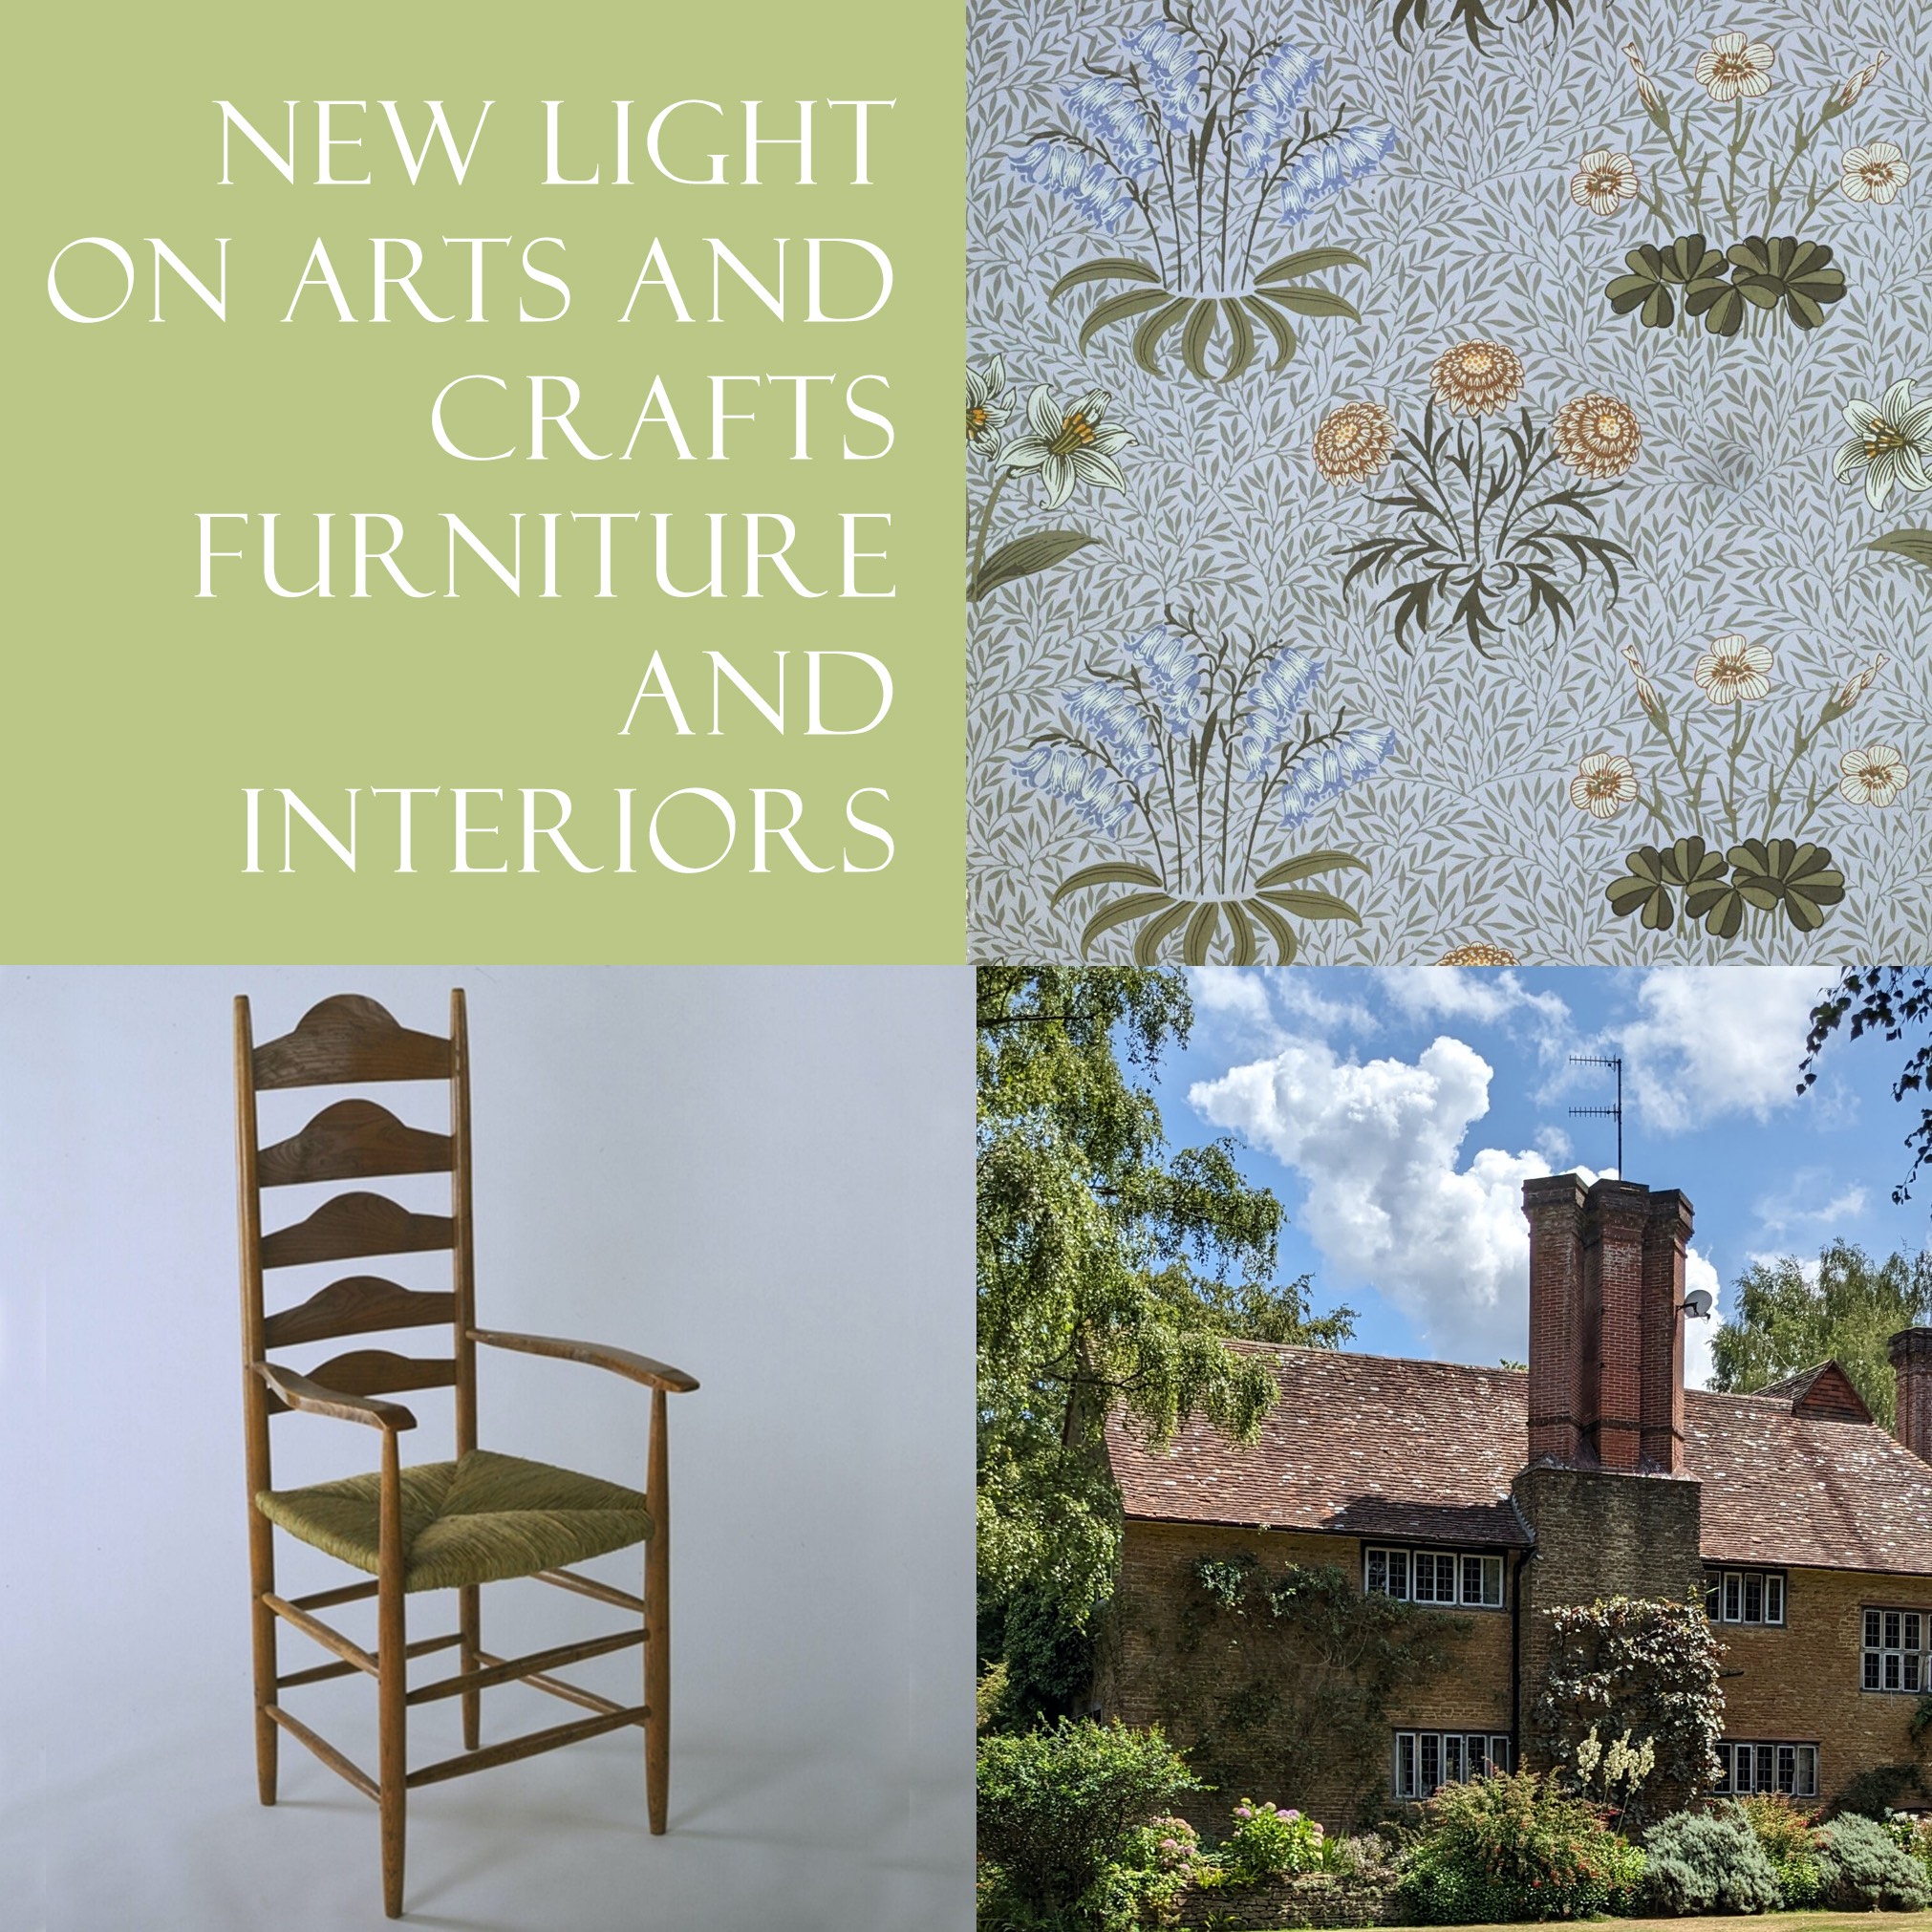 THE 48TH ANNUAL SYMPOSIUM OF THE FURNITURE HISTORY SOCIETY: ‘New Light on Arts and Crafts Furniture and Interiors’